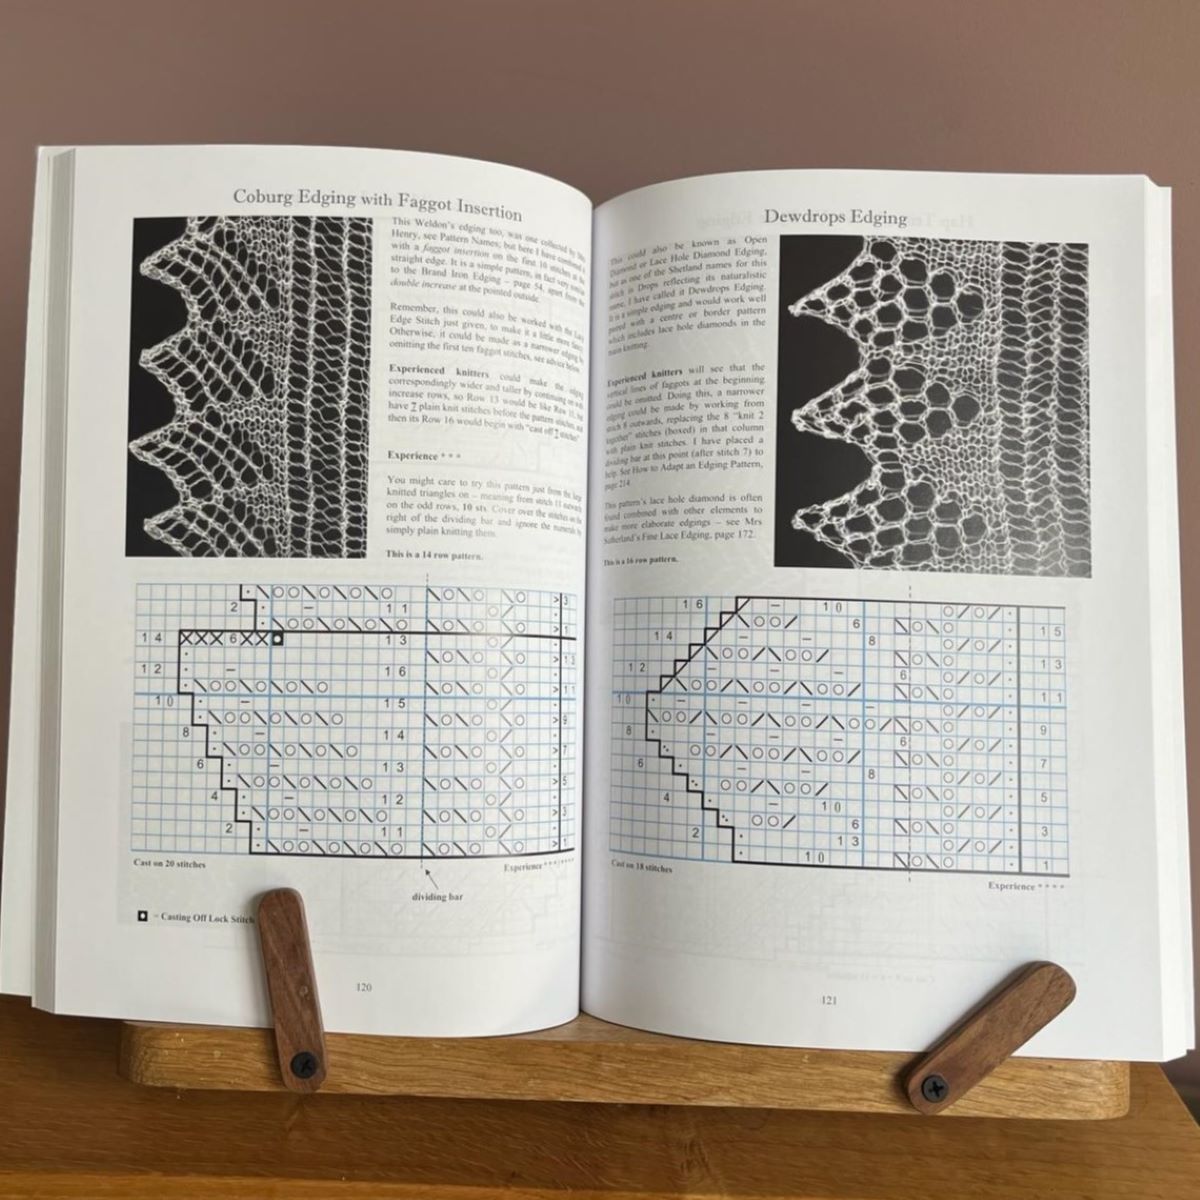 Heirloom Knitting: A Shetland Lace Pattern and Workbook by Sharon Miller